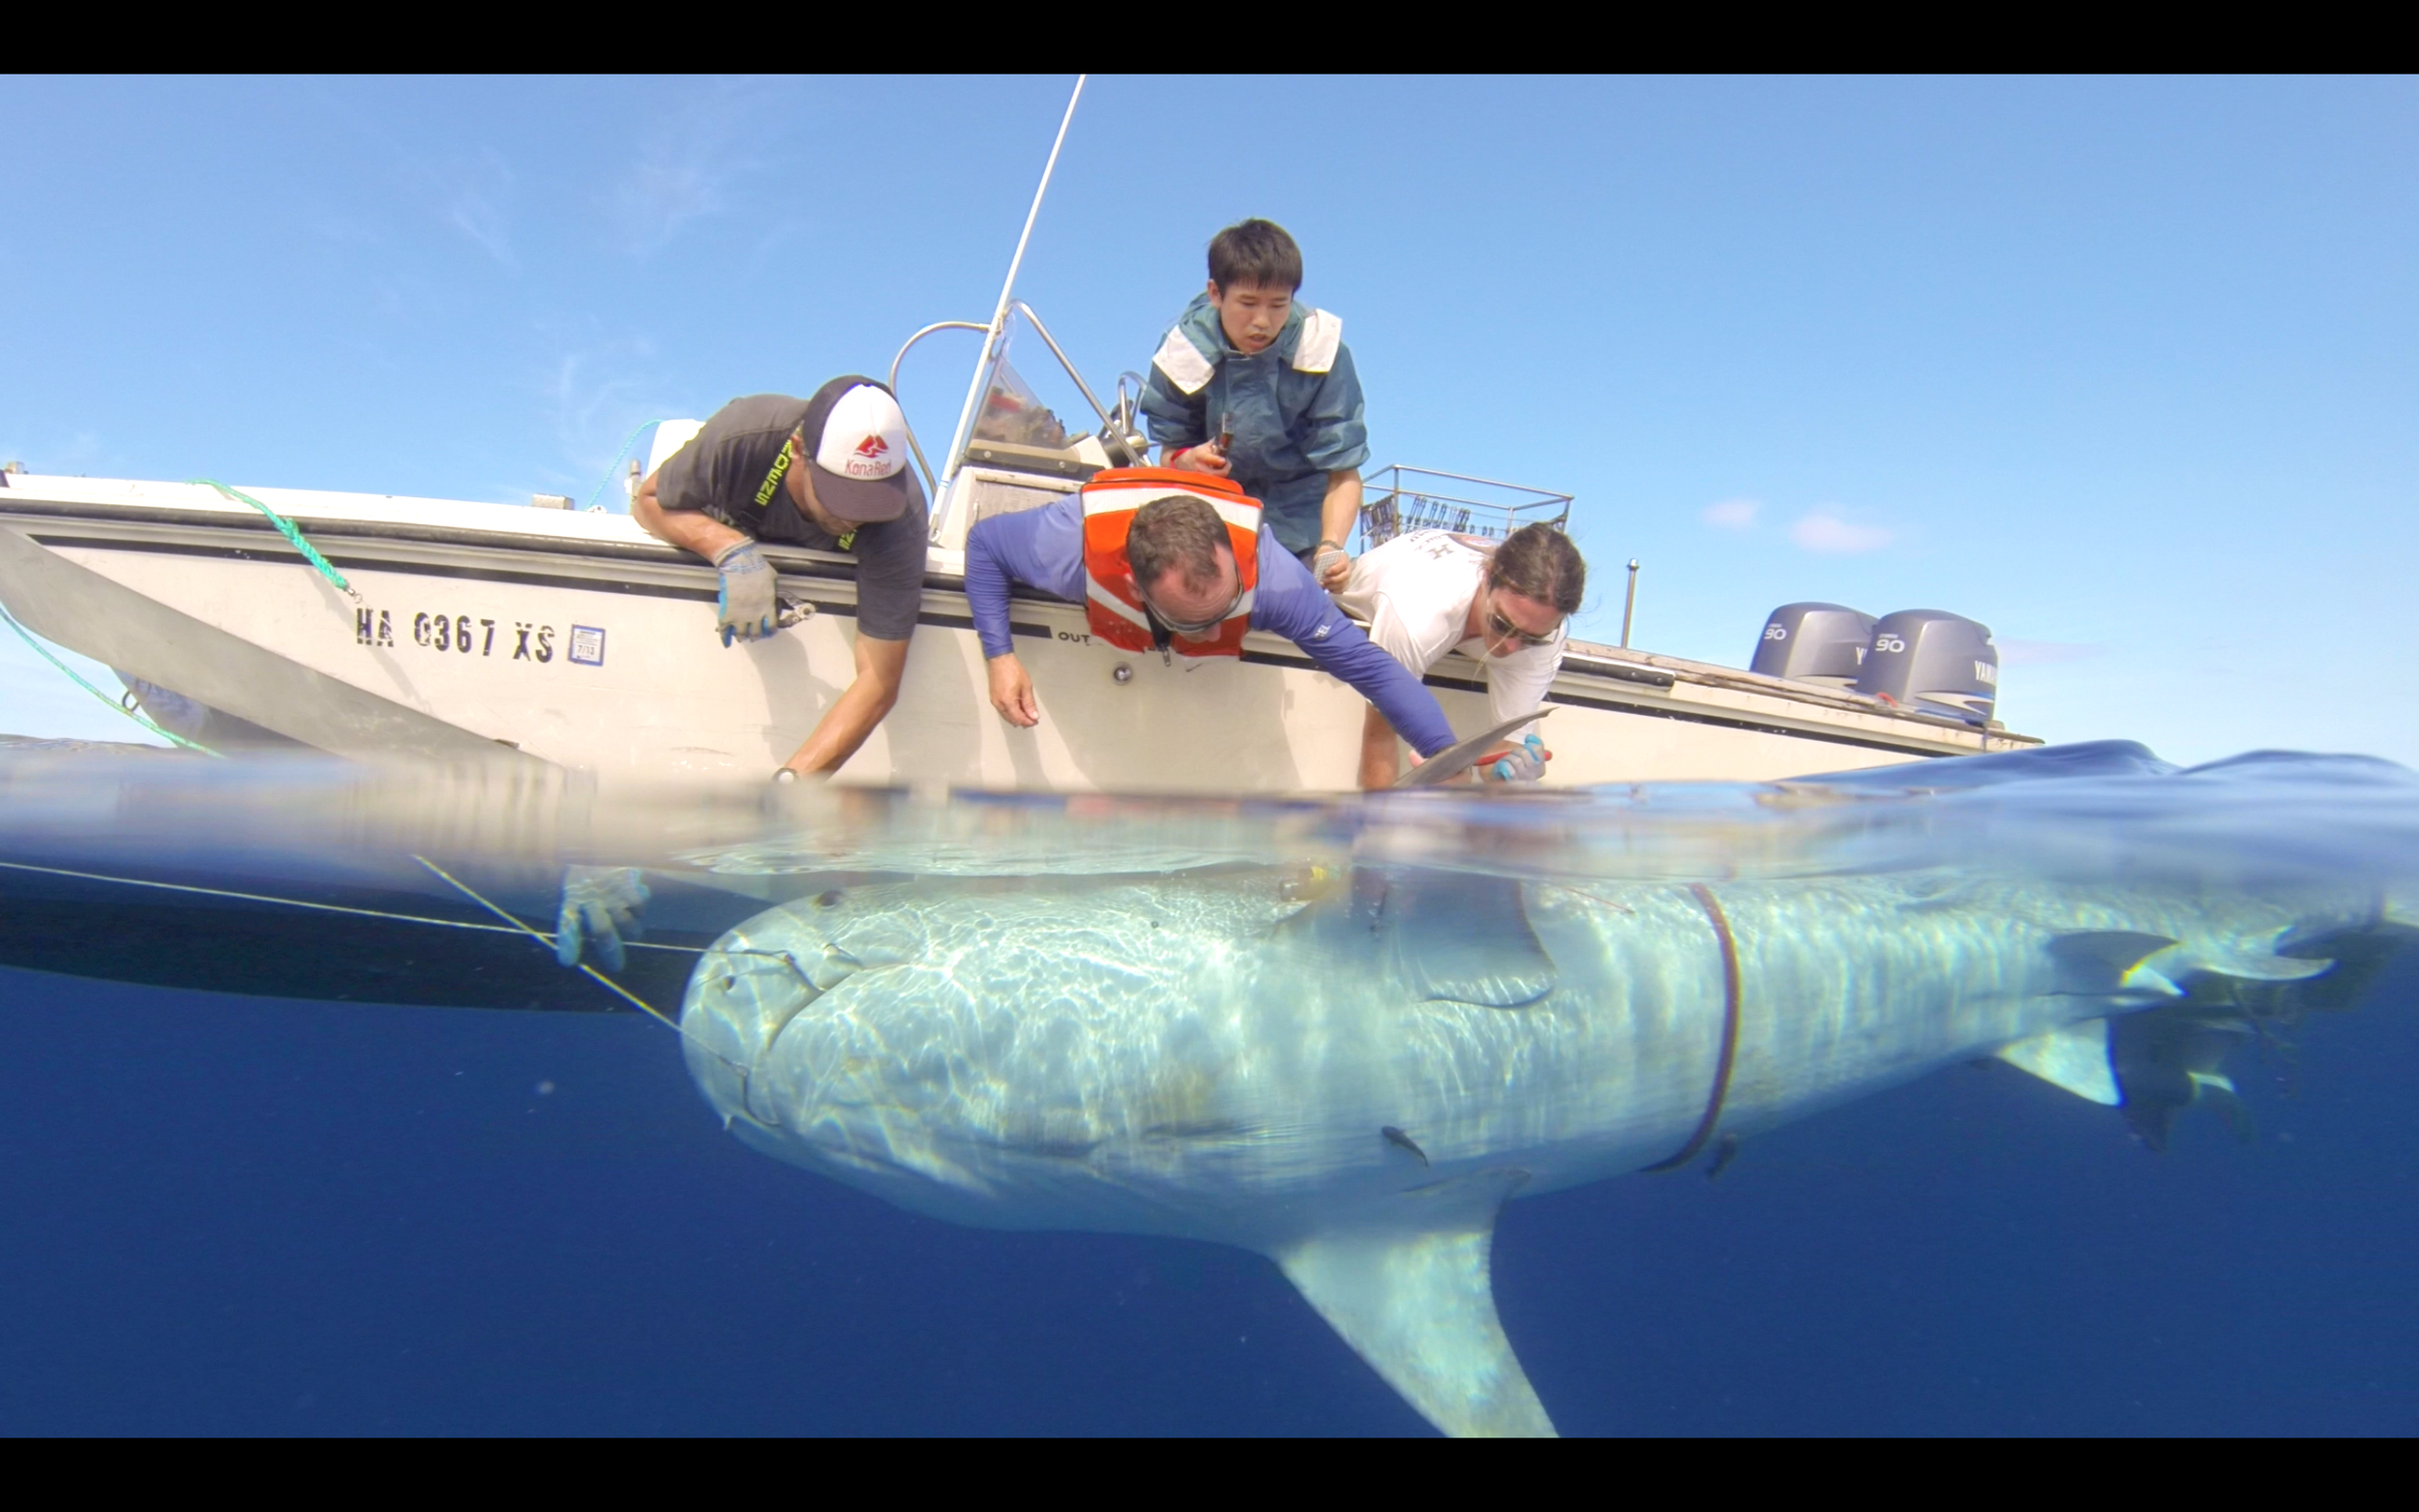 Research team tagging a shark, photo courtesy of Dr. Kim Holland